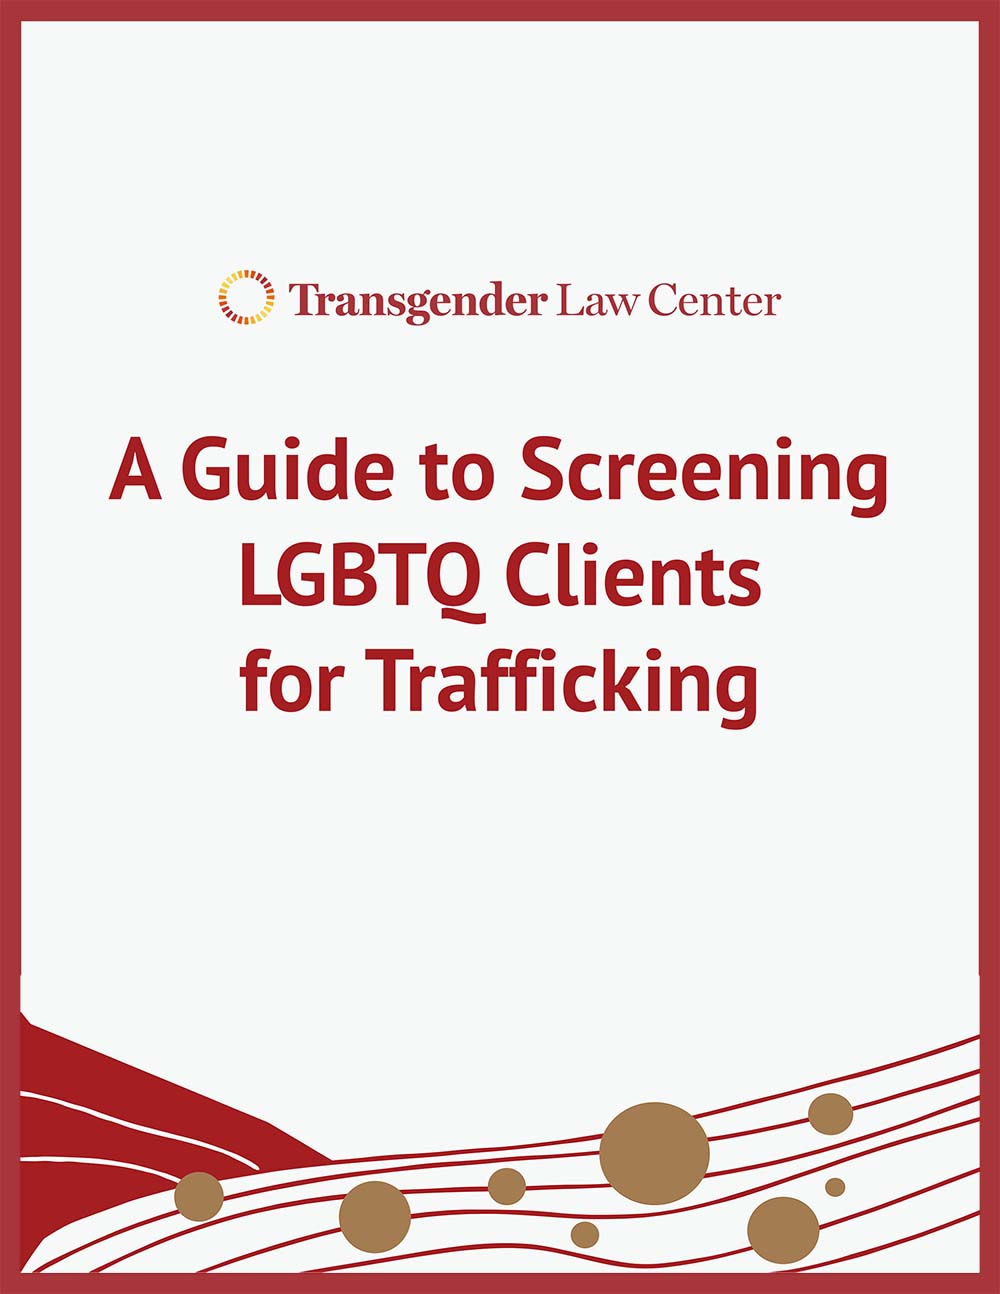 Cover for the resource "A Guide to Screening LGBTQ Clients for Trafficking". There is a red and gold wavy design along the bottom edge.